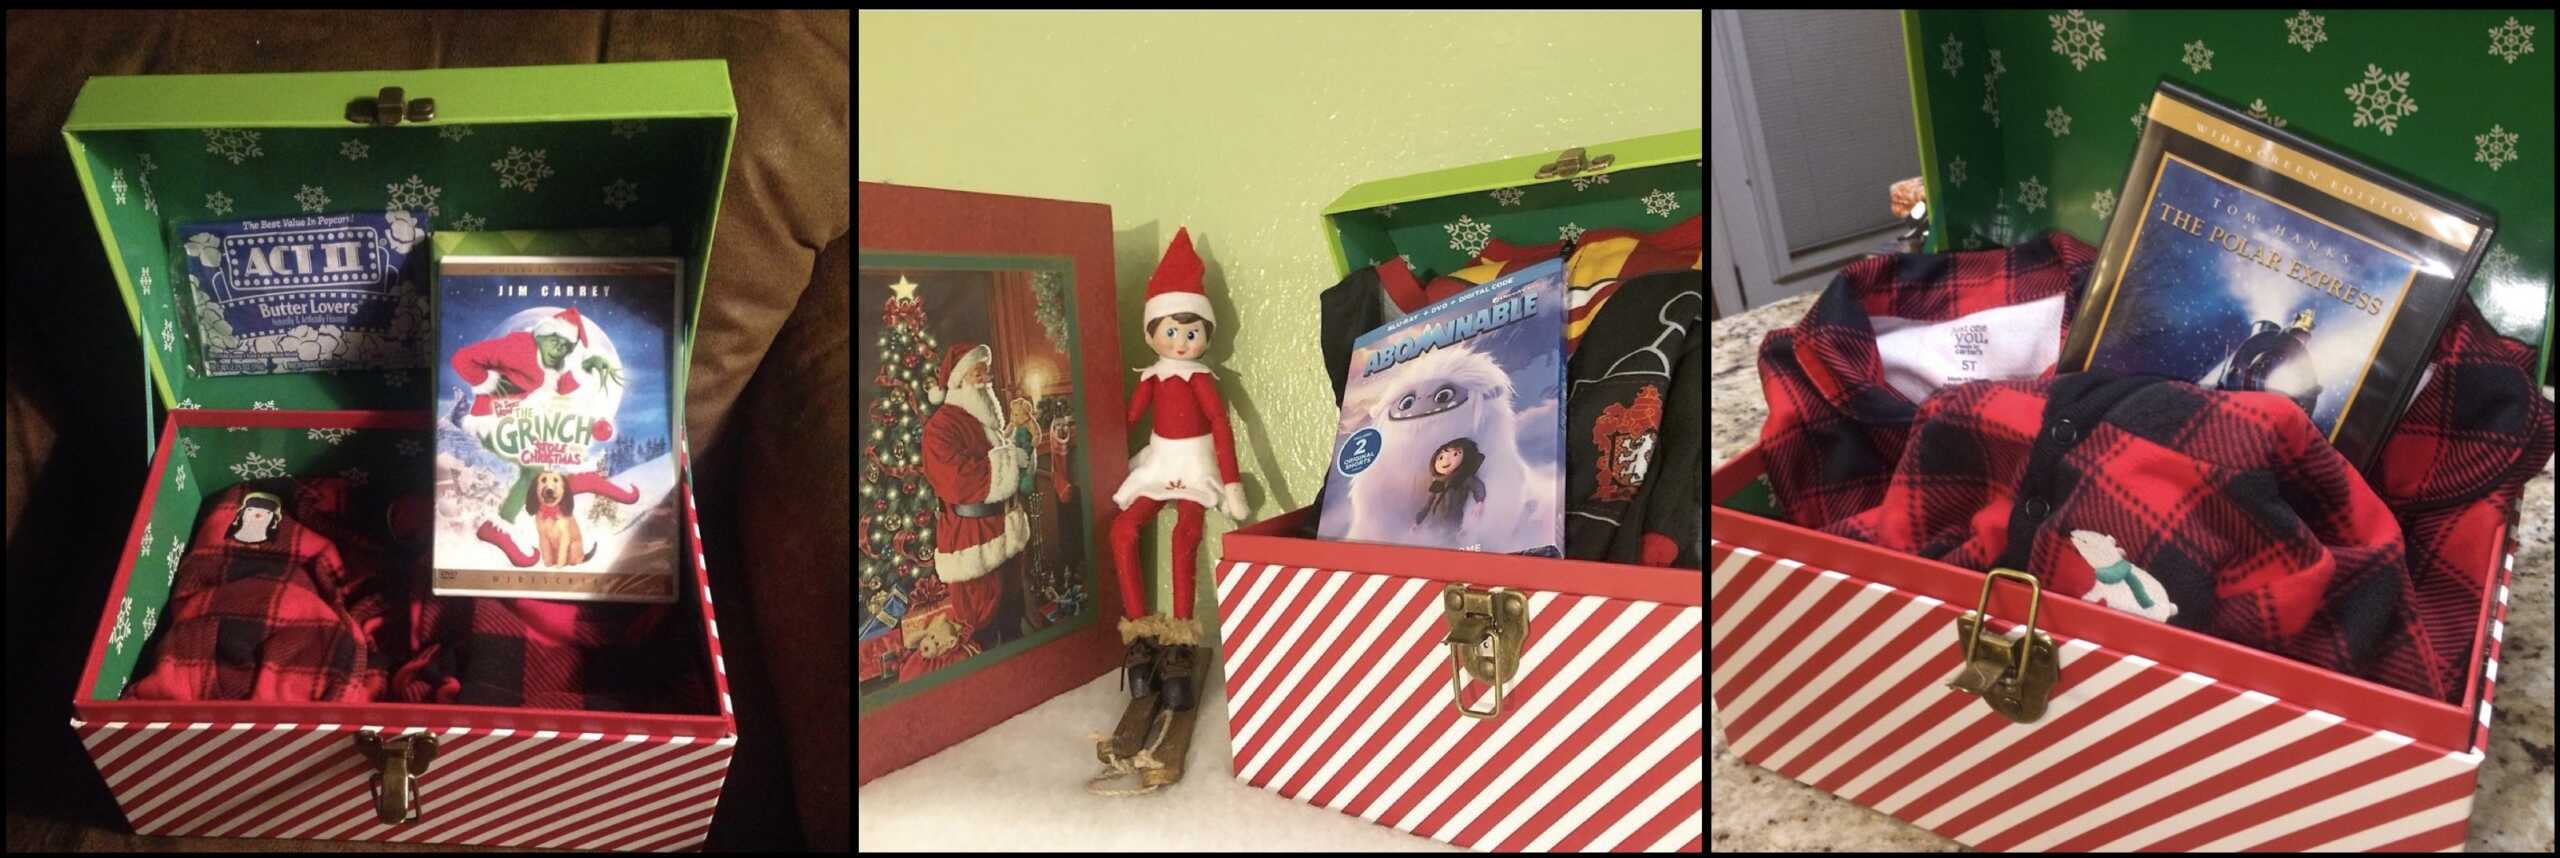 Making {Easy} Elf Traditions